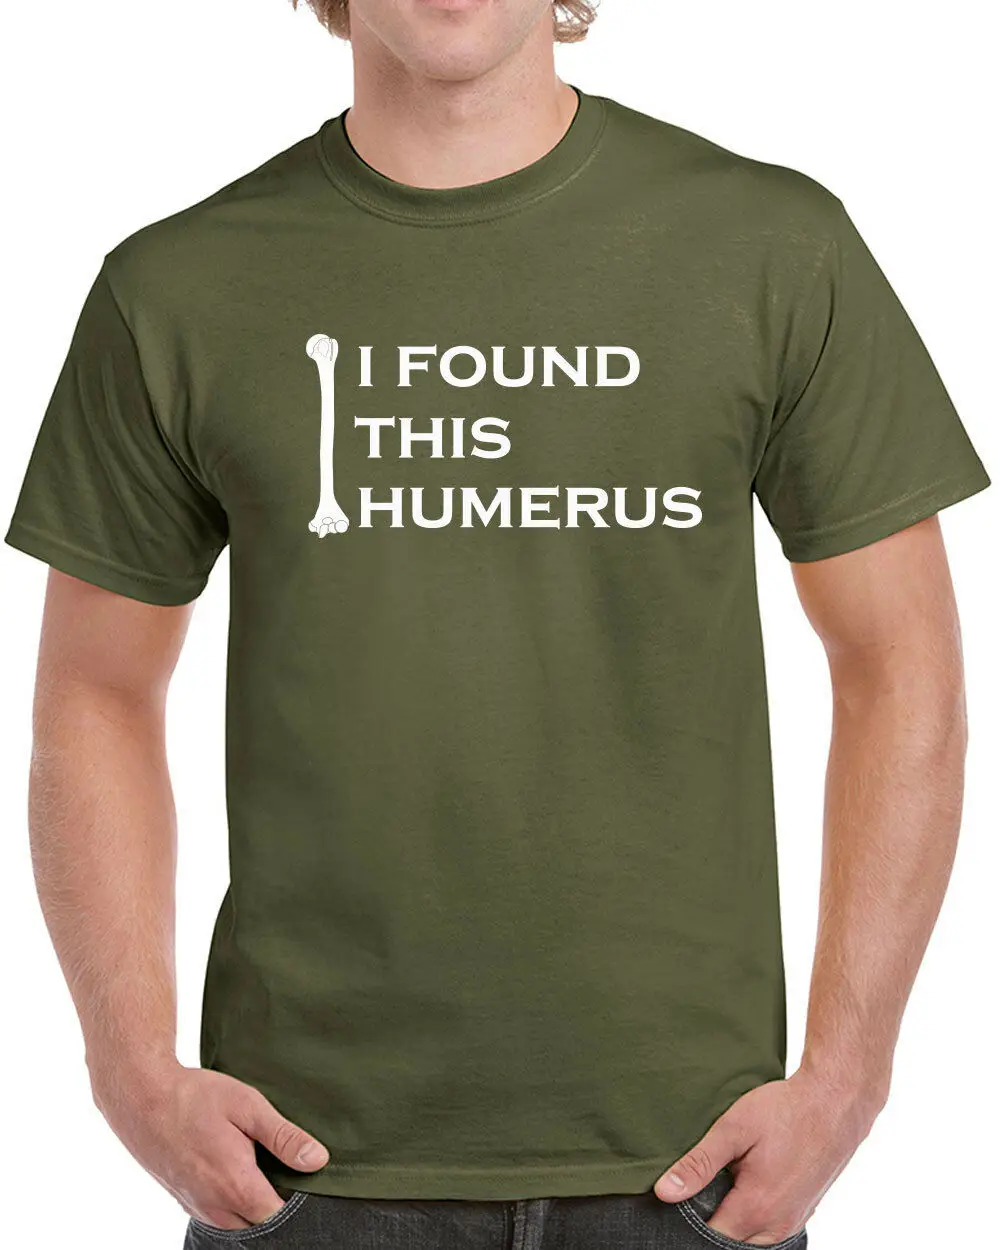 

I Found This Humerus. Funny Doctor Humor College Bone T-Shirt. Summer Cotton Short Sleeve O-Neck Mens T Shirt New S-3XL